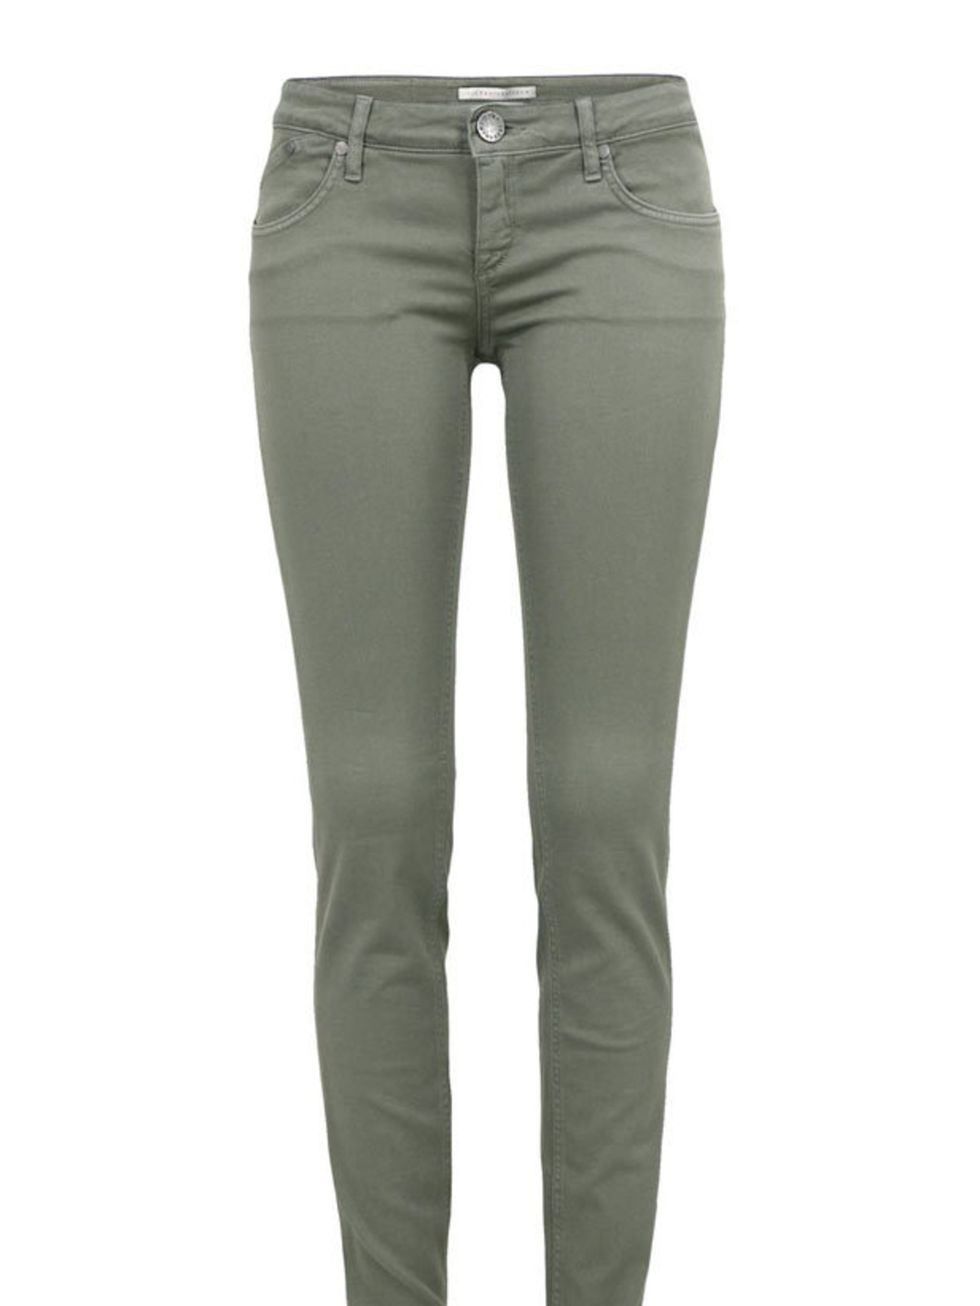 <p>For a spring-appropriate alternative to stonewash denim, opt for khaki jeans like this great pair from the Queen of skinnies Victoria Beckham olive jeans, £225, at <a href="http://www.coggles.com/item/Victoria-Beckham/Low-Rise-Super-Skinny-Olive-Jeans